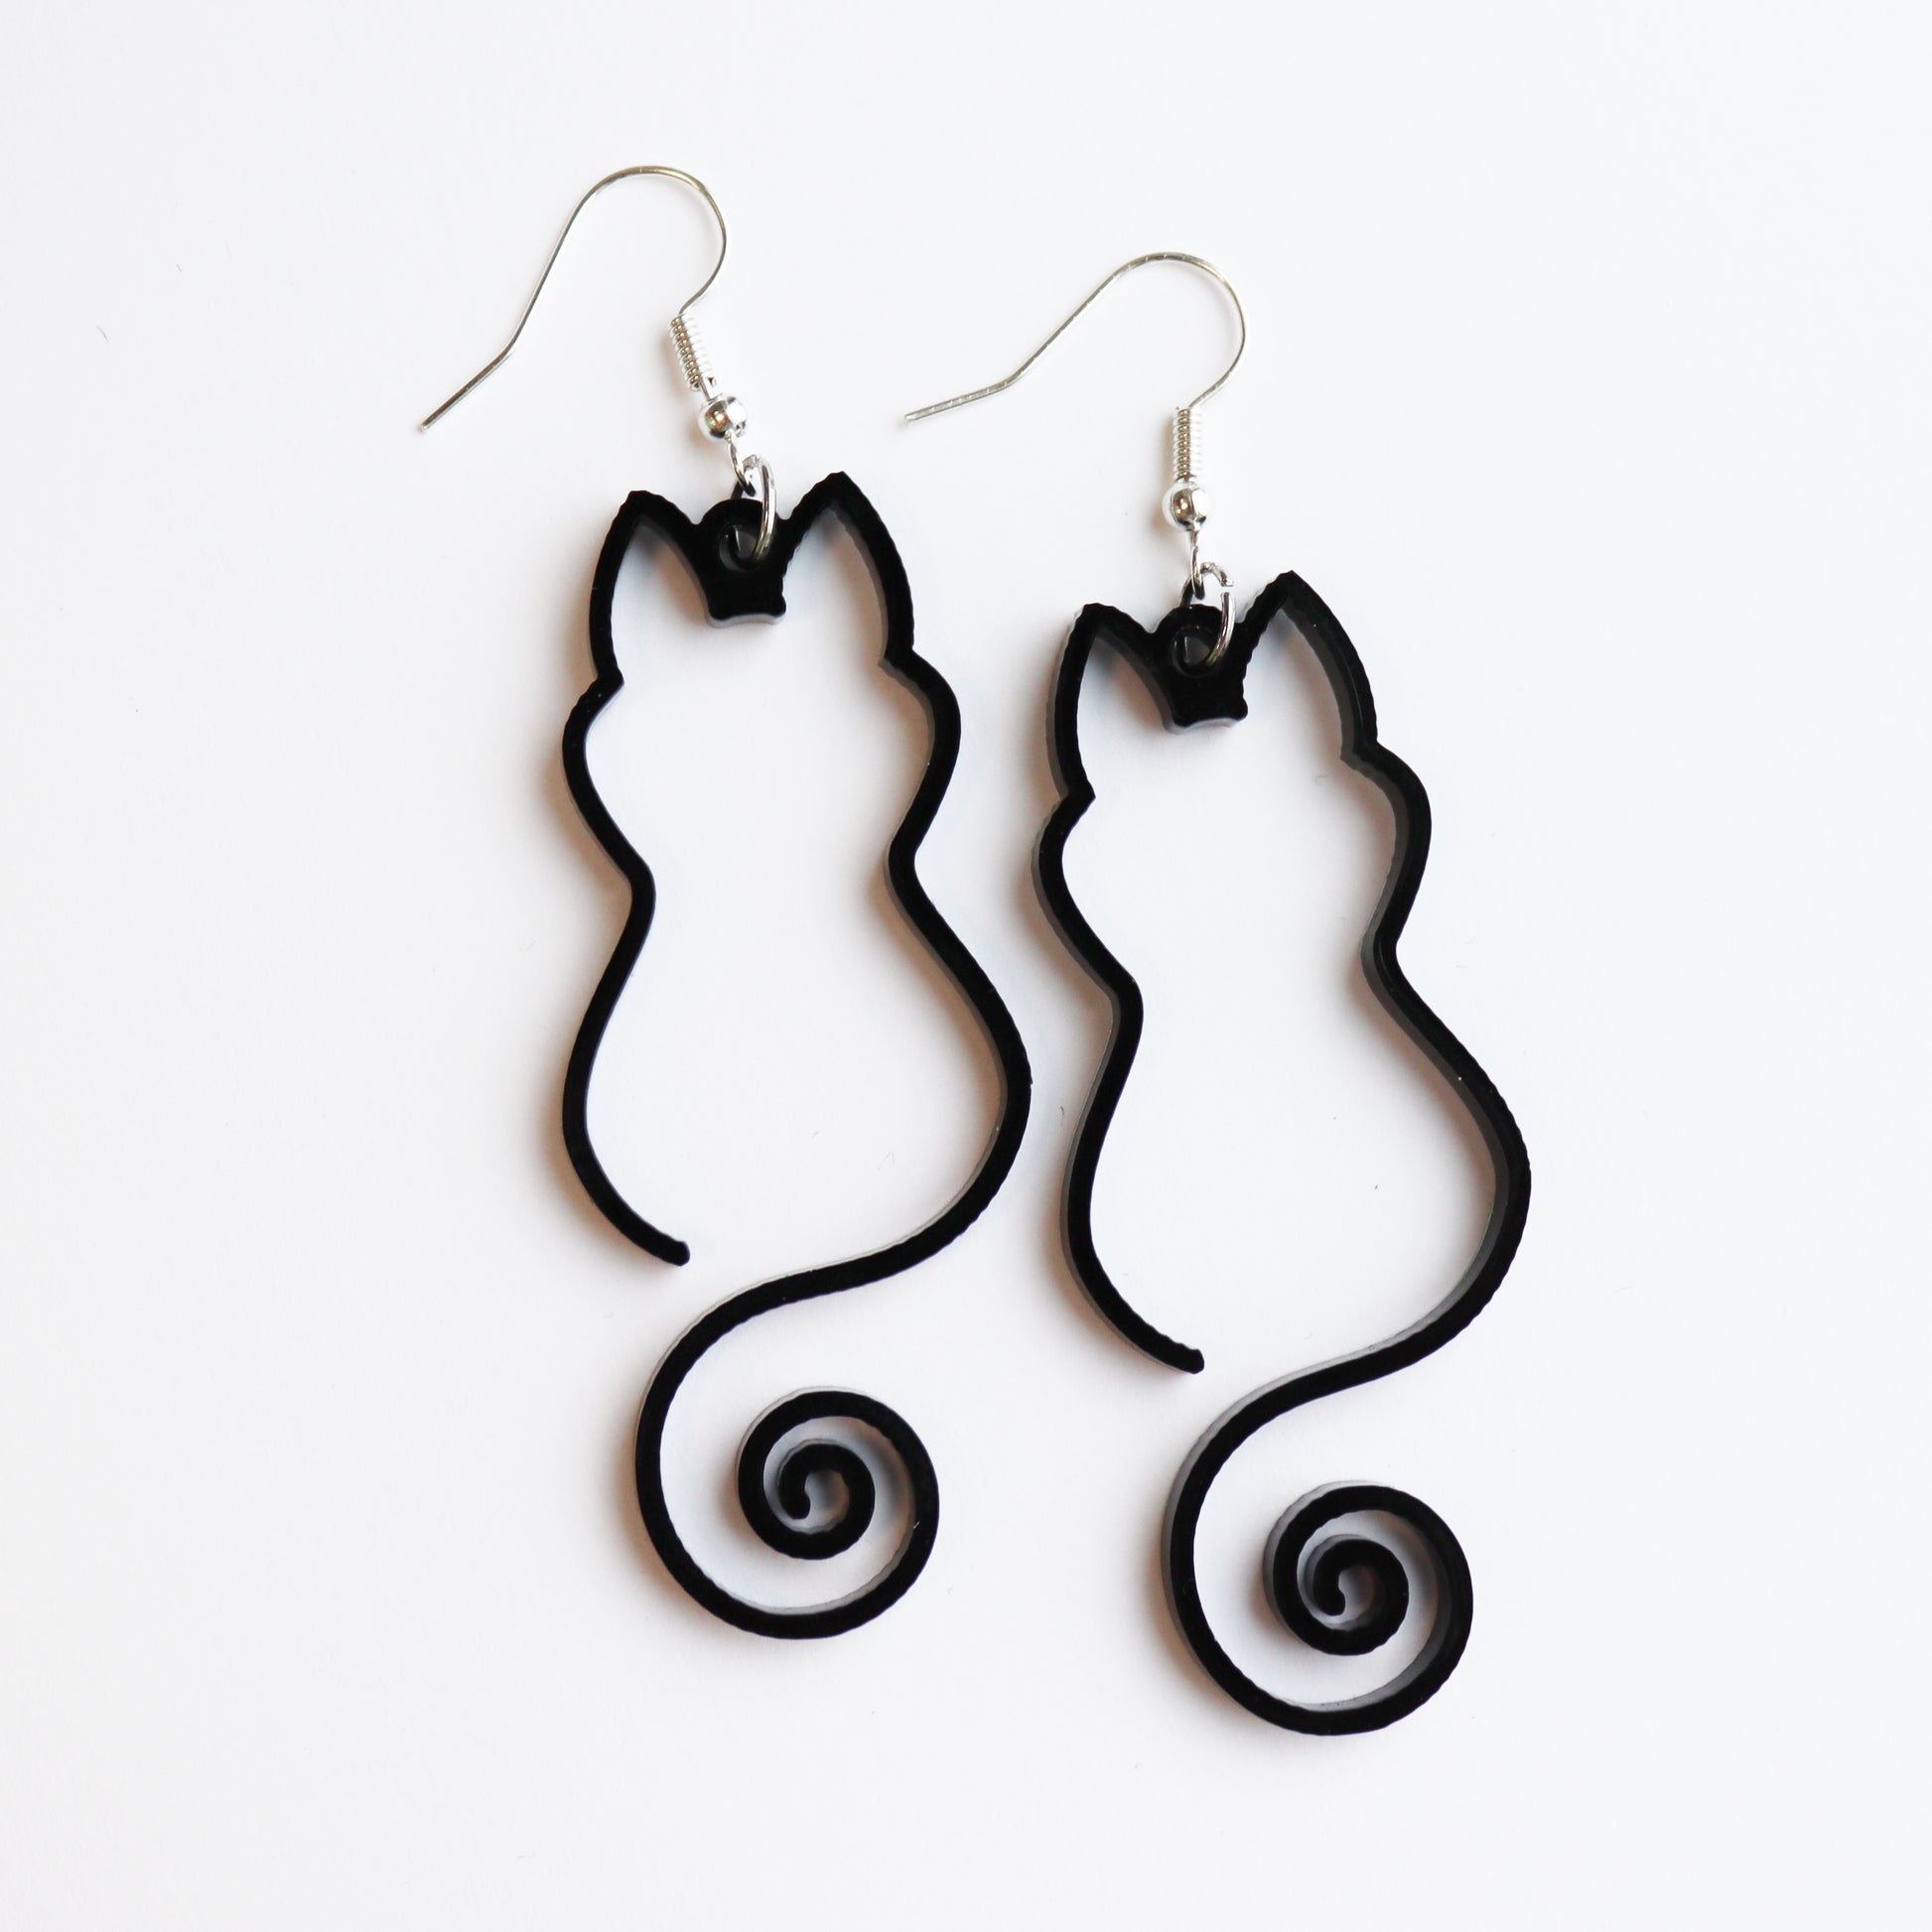 black cat silhouette large hanging black acrylc statement earrings perfect for halloween